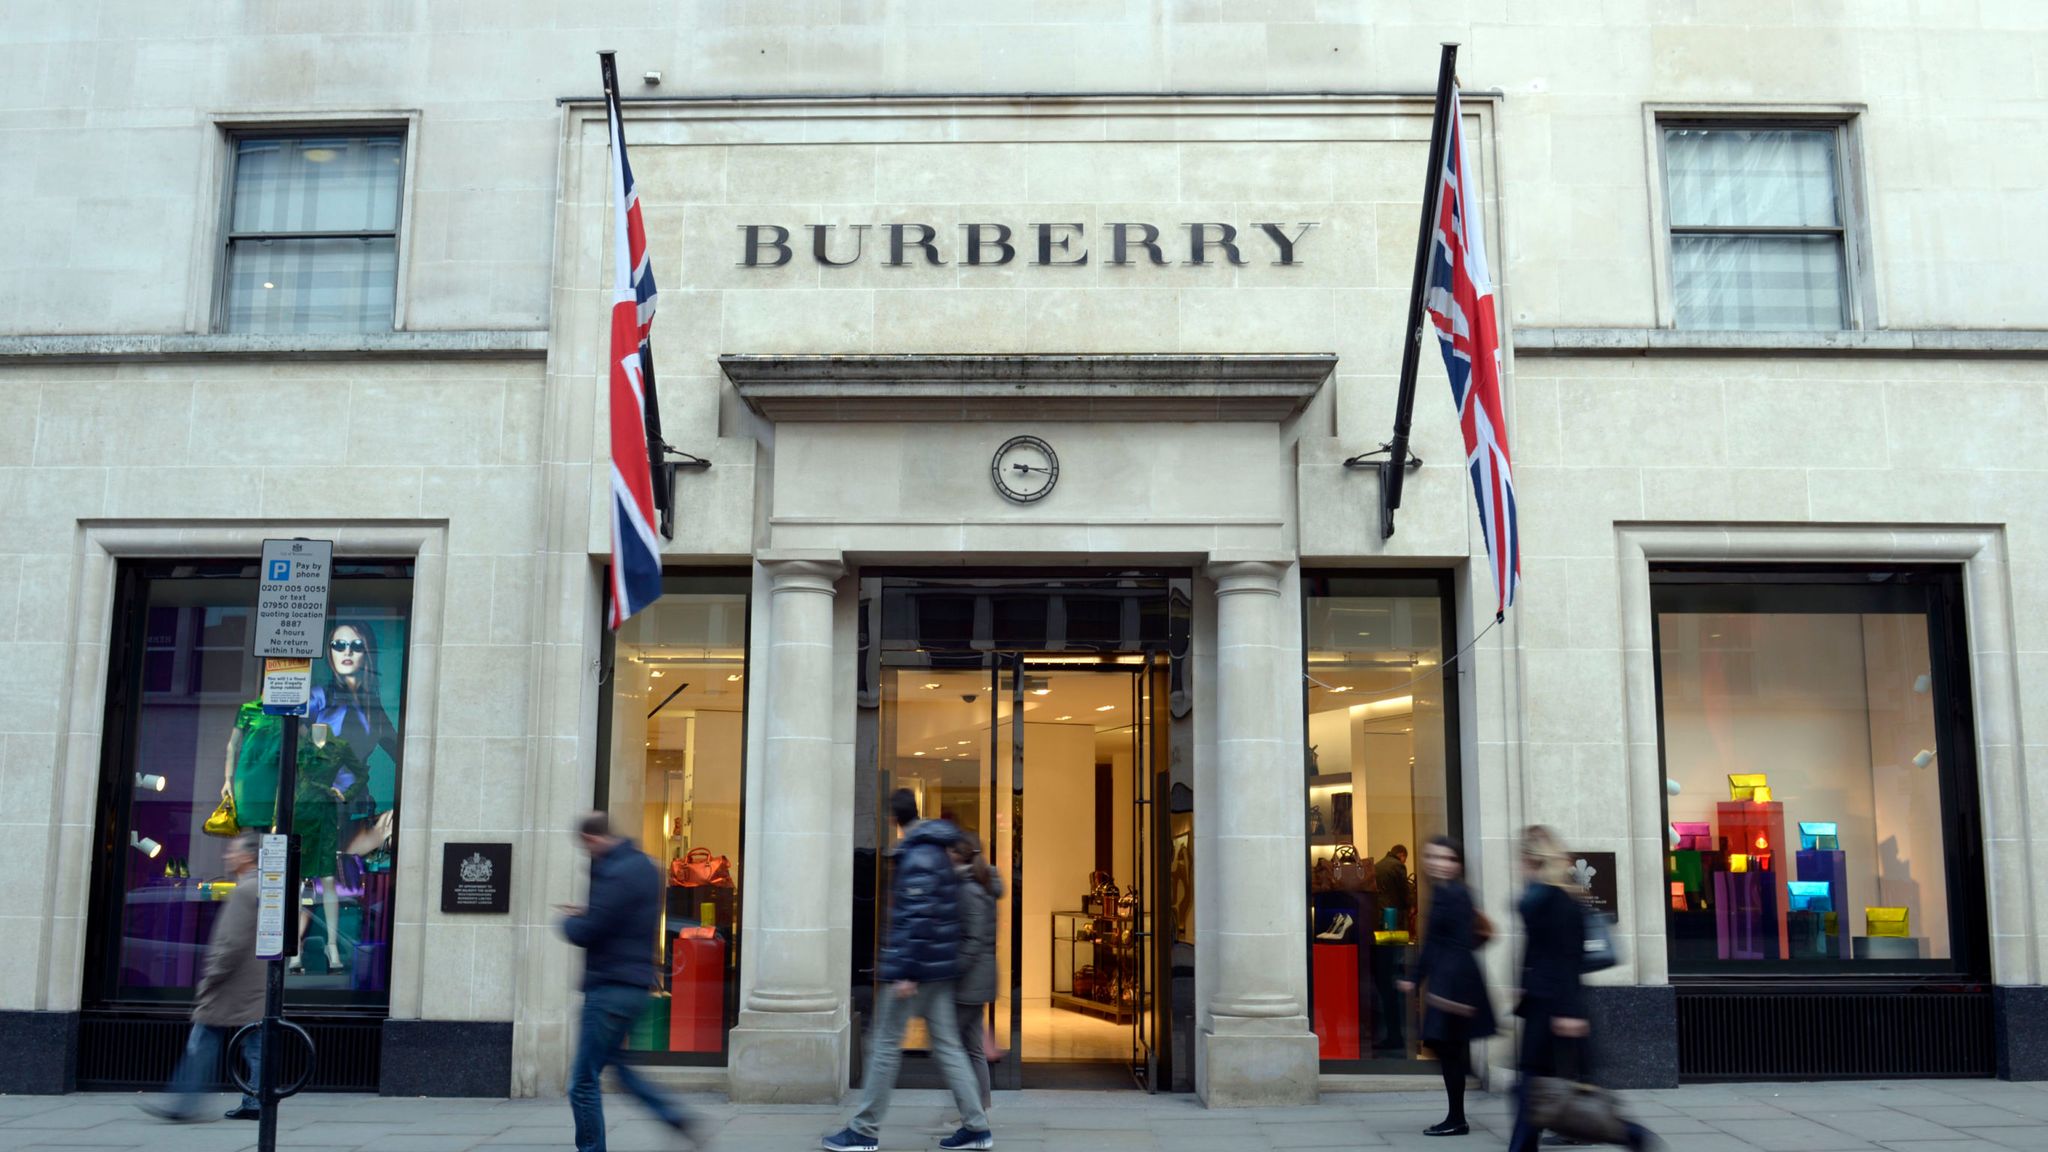 Burberry bloodied by shareholder pay revolt | Business News | Sky News